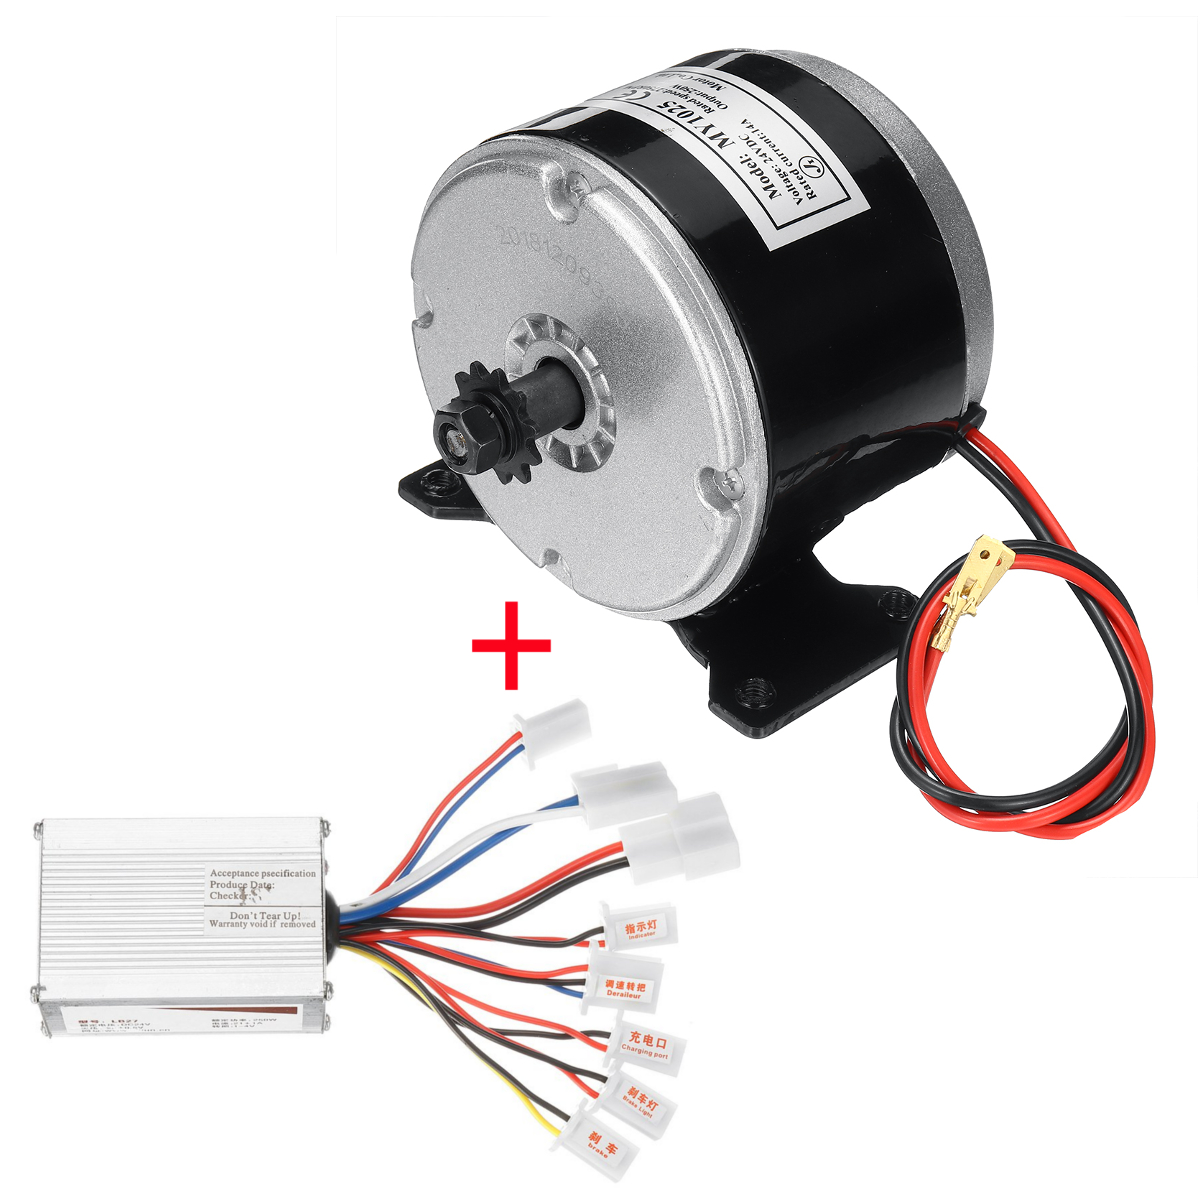 

24V 250W Brushed Motor With Controller For 25H Chain Electric Bicycle Scooter E-Bike